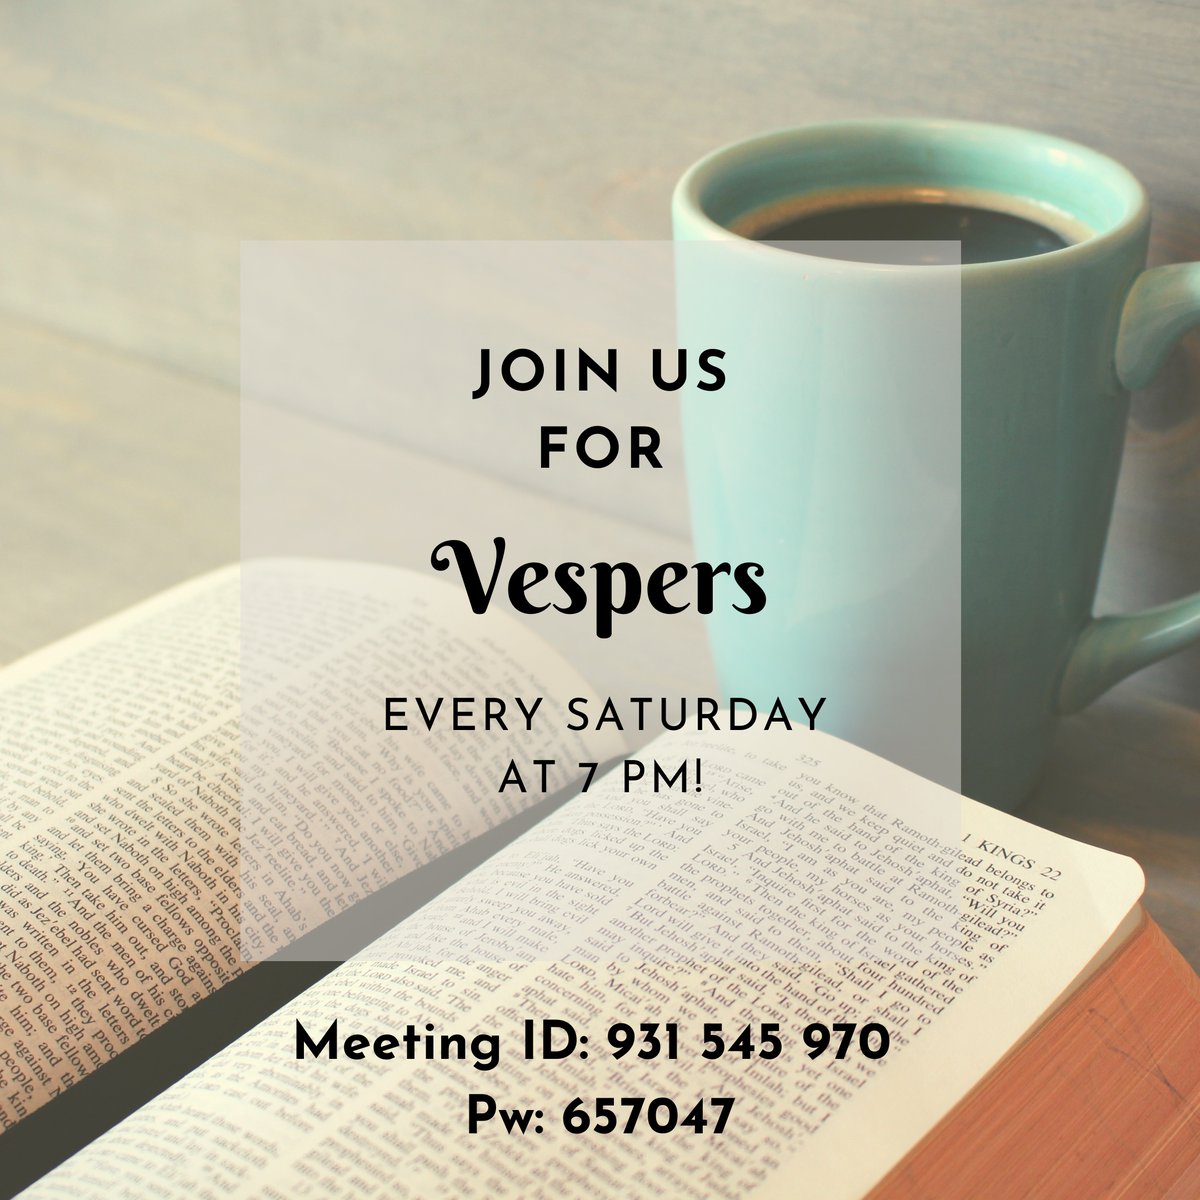 Join us to close the Sabbath out every Saturday evening at 7pm. #Mohsda #MessageofHope #godisgood #GodIsLove #Vespers #SDA #SeventhdayAdventist #zoomworship #Zoom